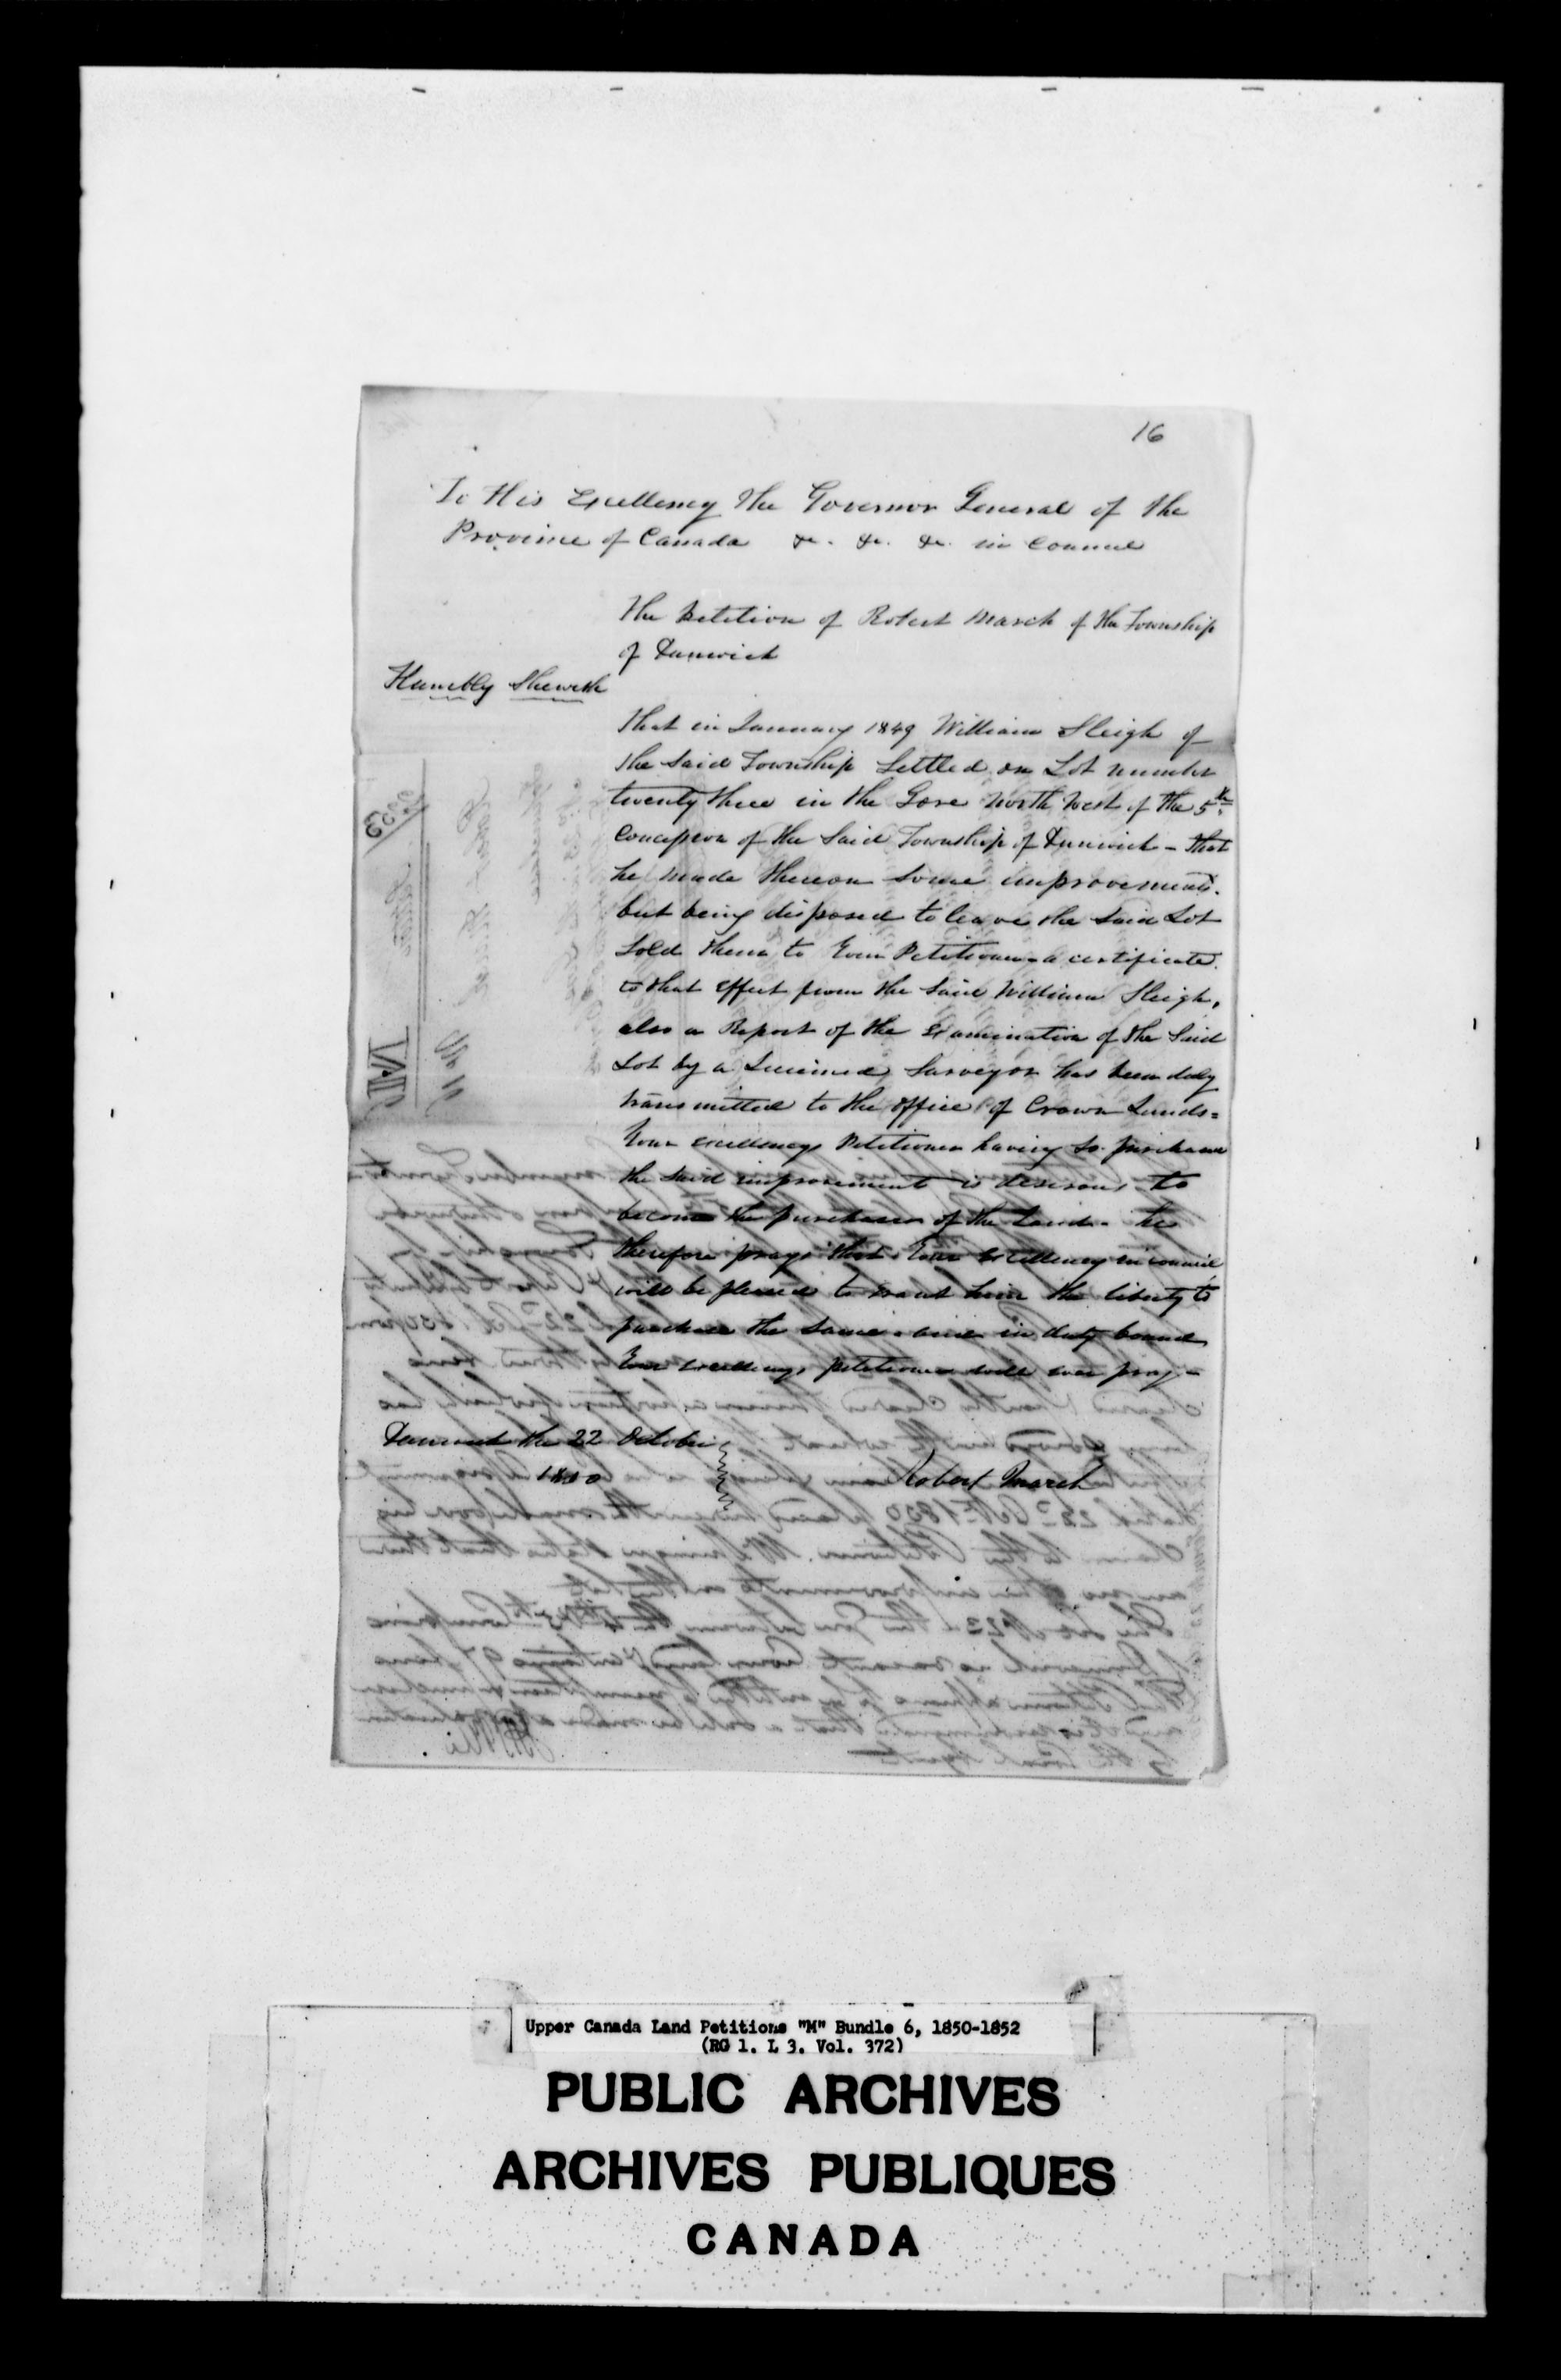 Title: Upper Canada Land Petitions (1763-1865) - Mikan Number: 205131 - Microform: c-2231